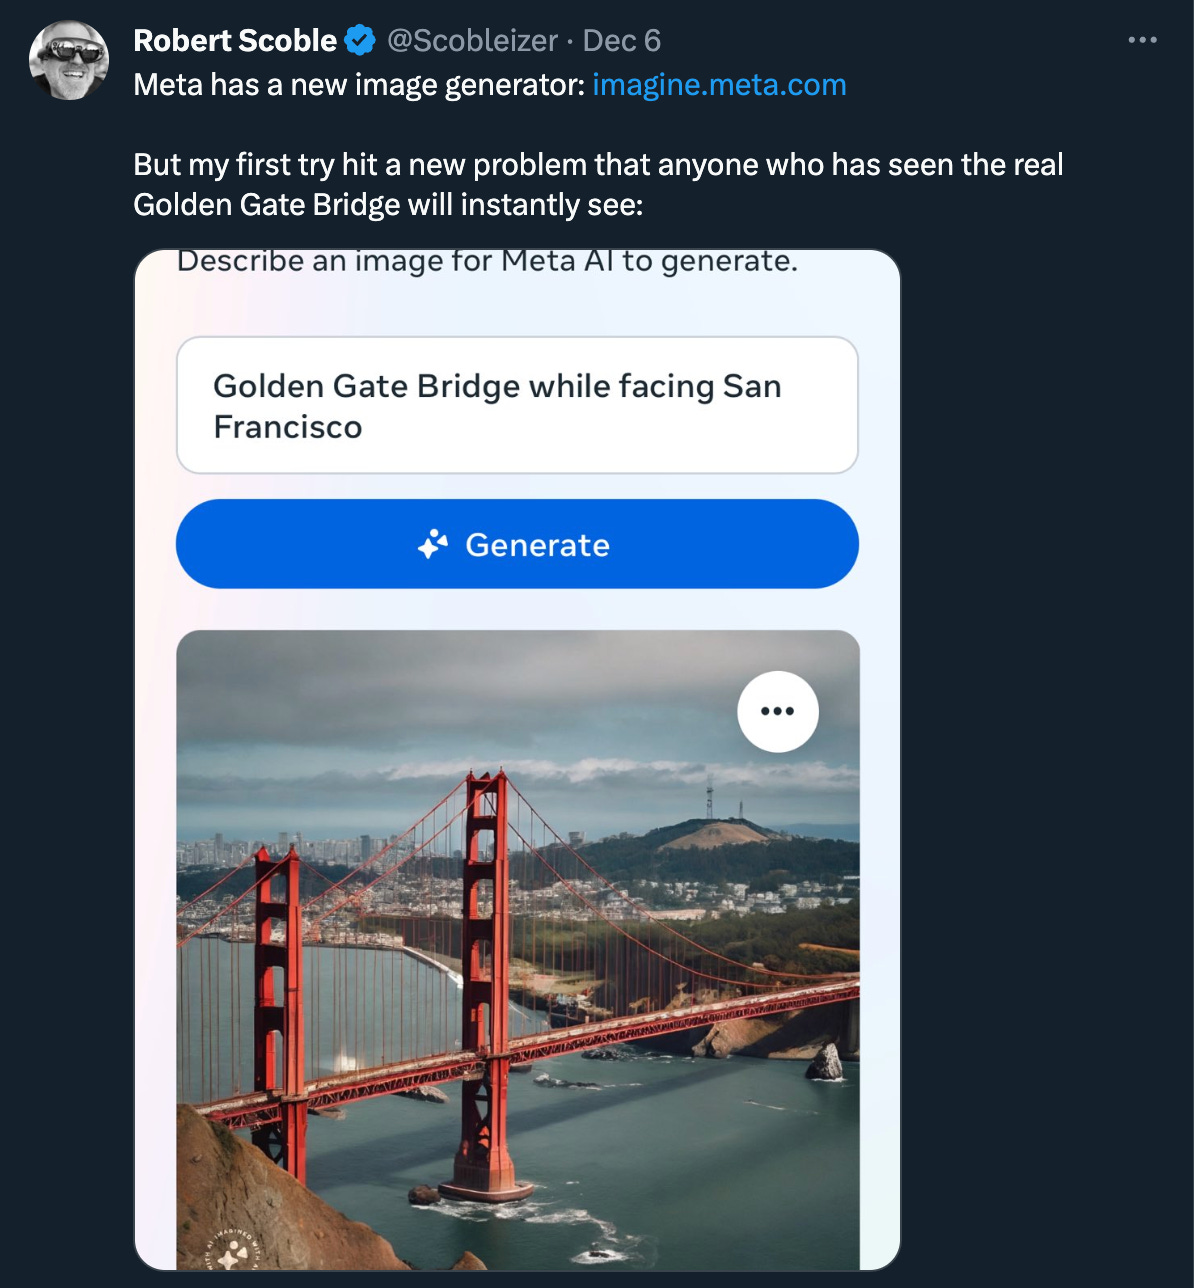 Robert Scoble's tweet about Meta's new image generator shows one creation of a very odd version of the Golden Gate Bridge, with towers in the wrong place.